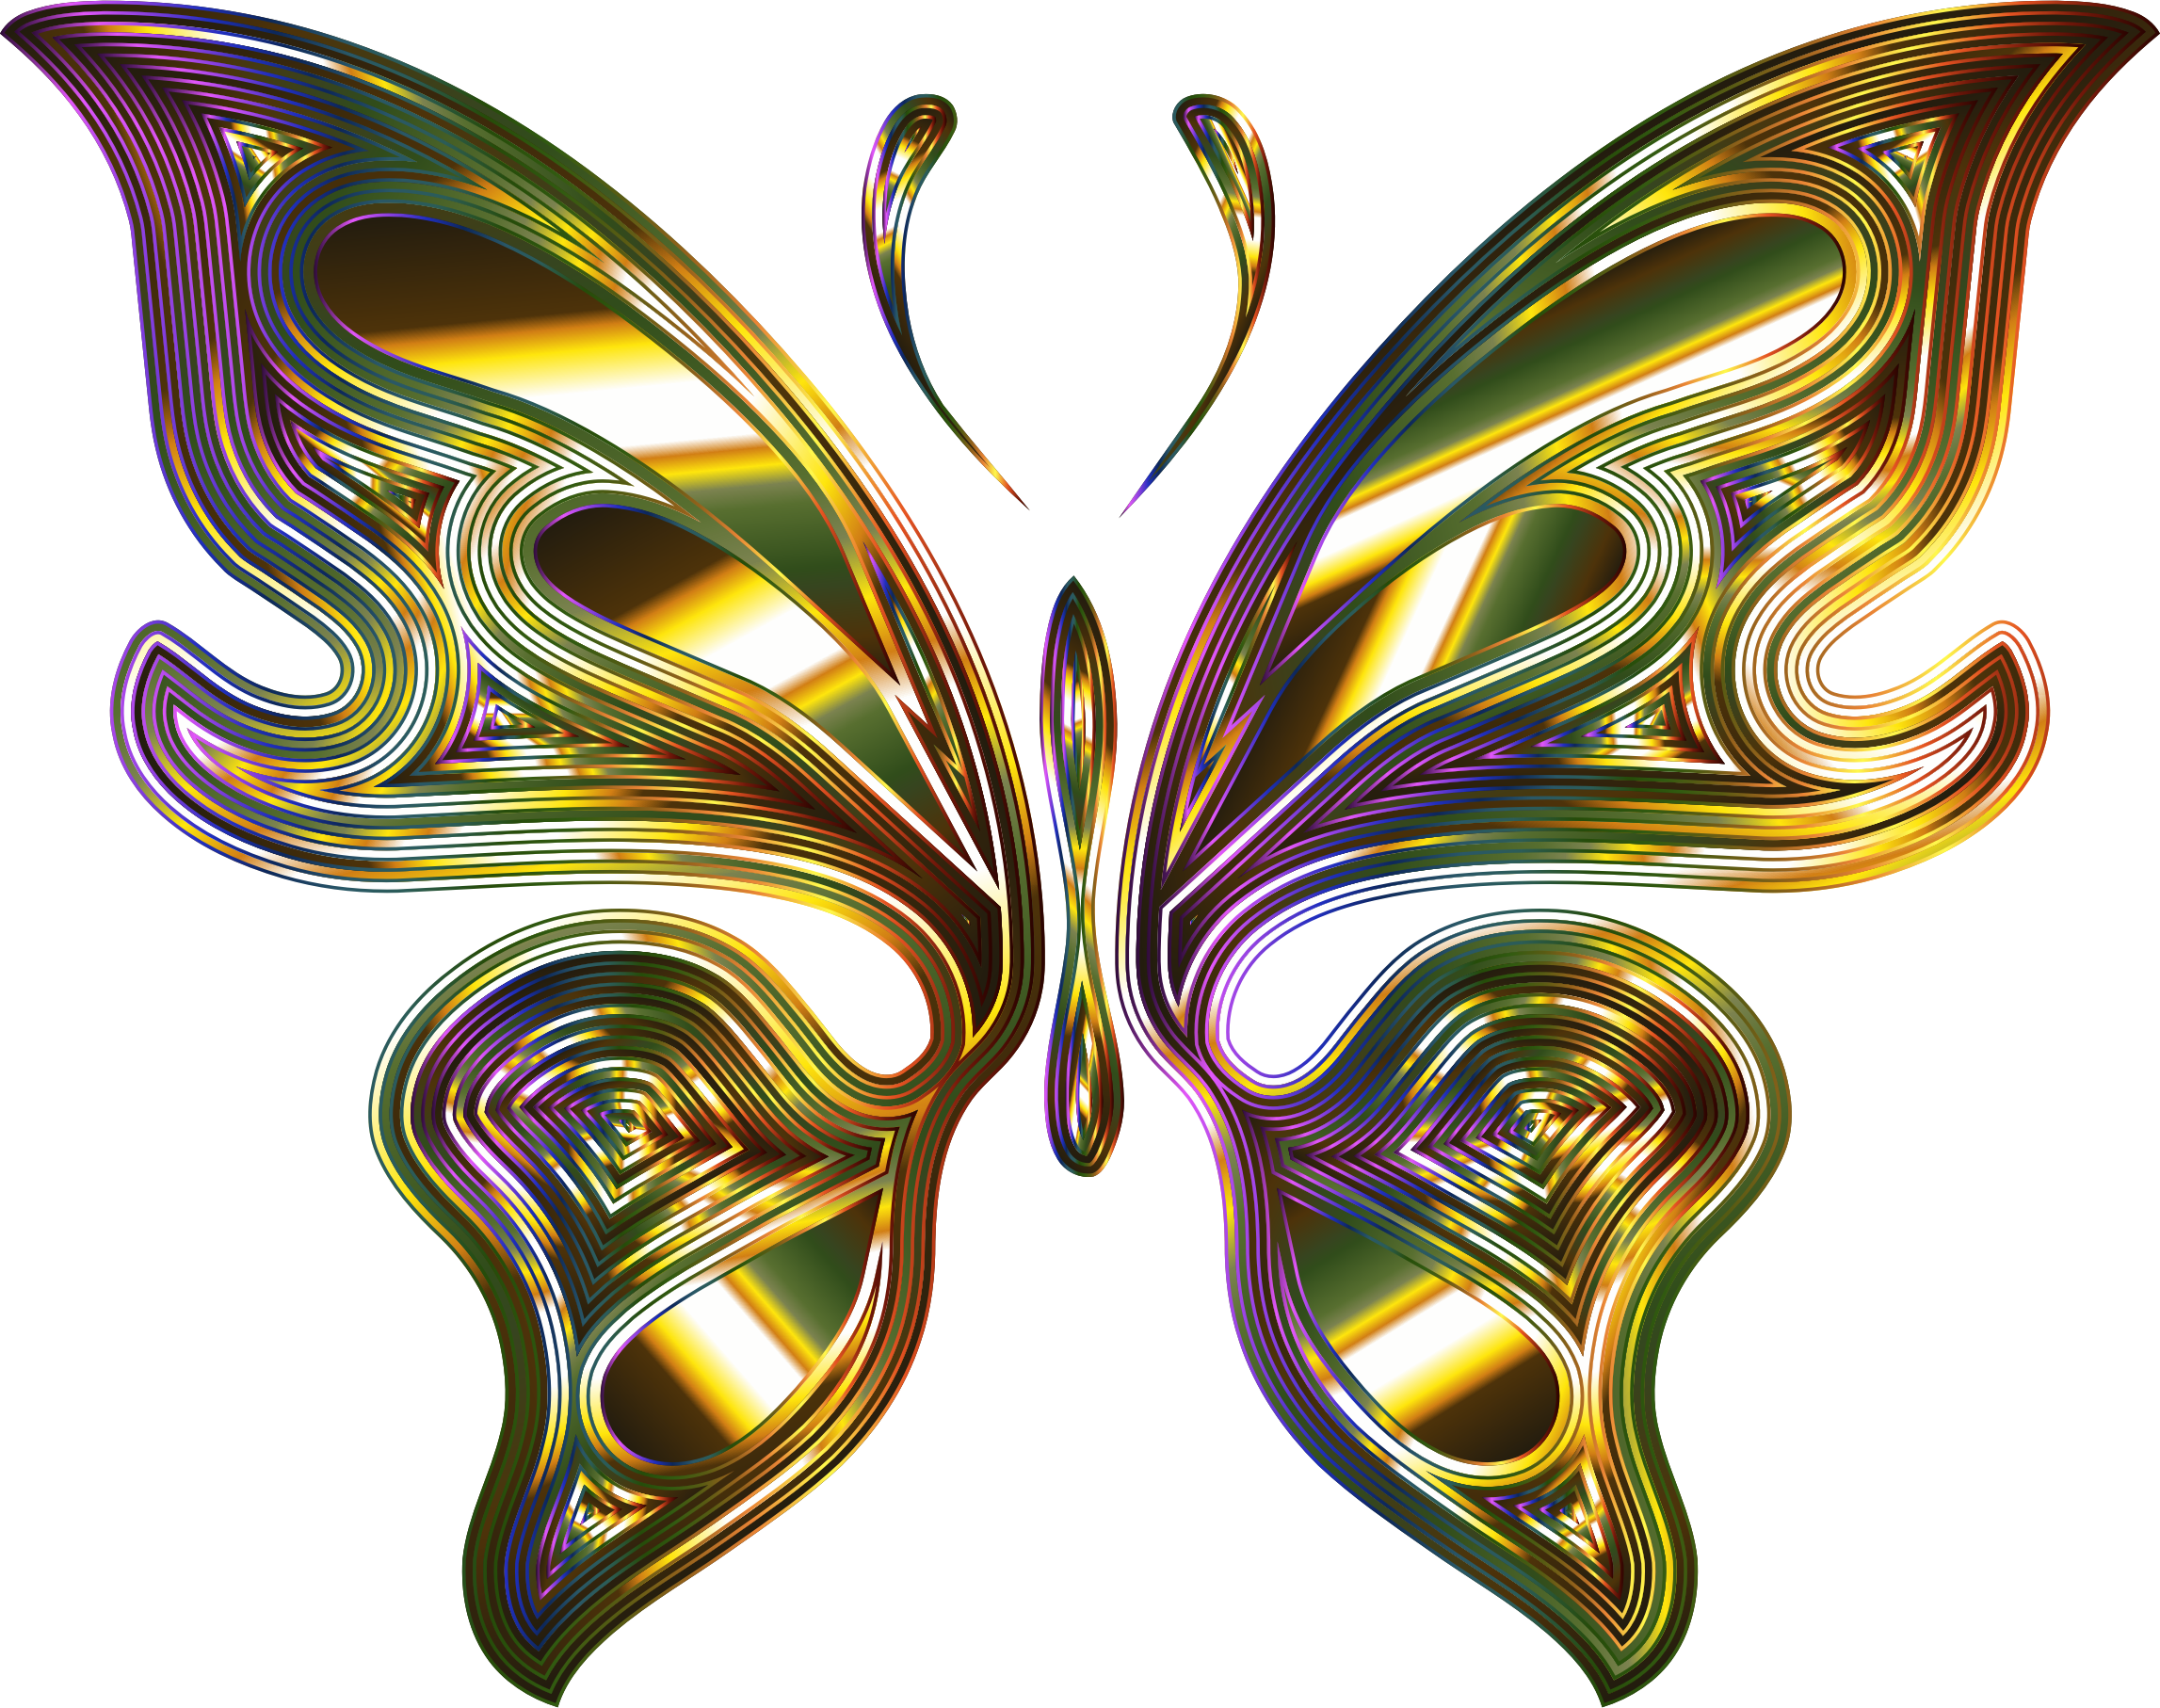 Download and share clipart about Butterfly 14 No Background - Transparent B...